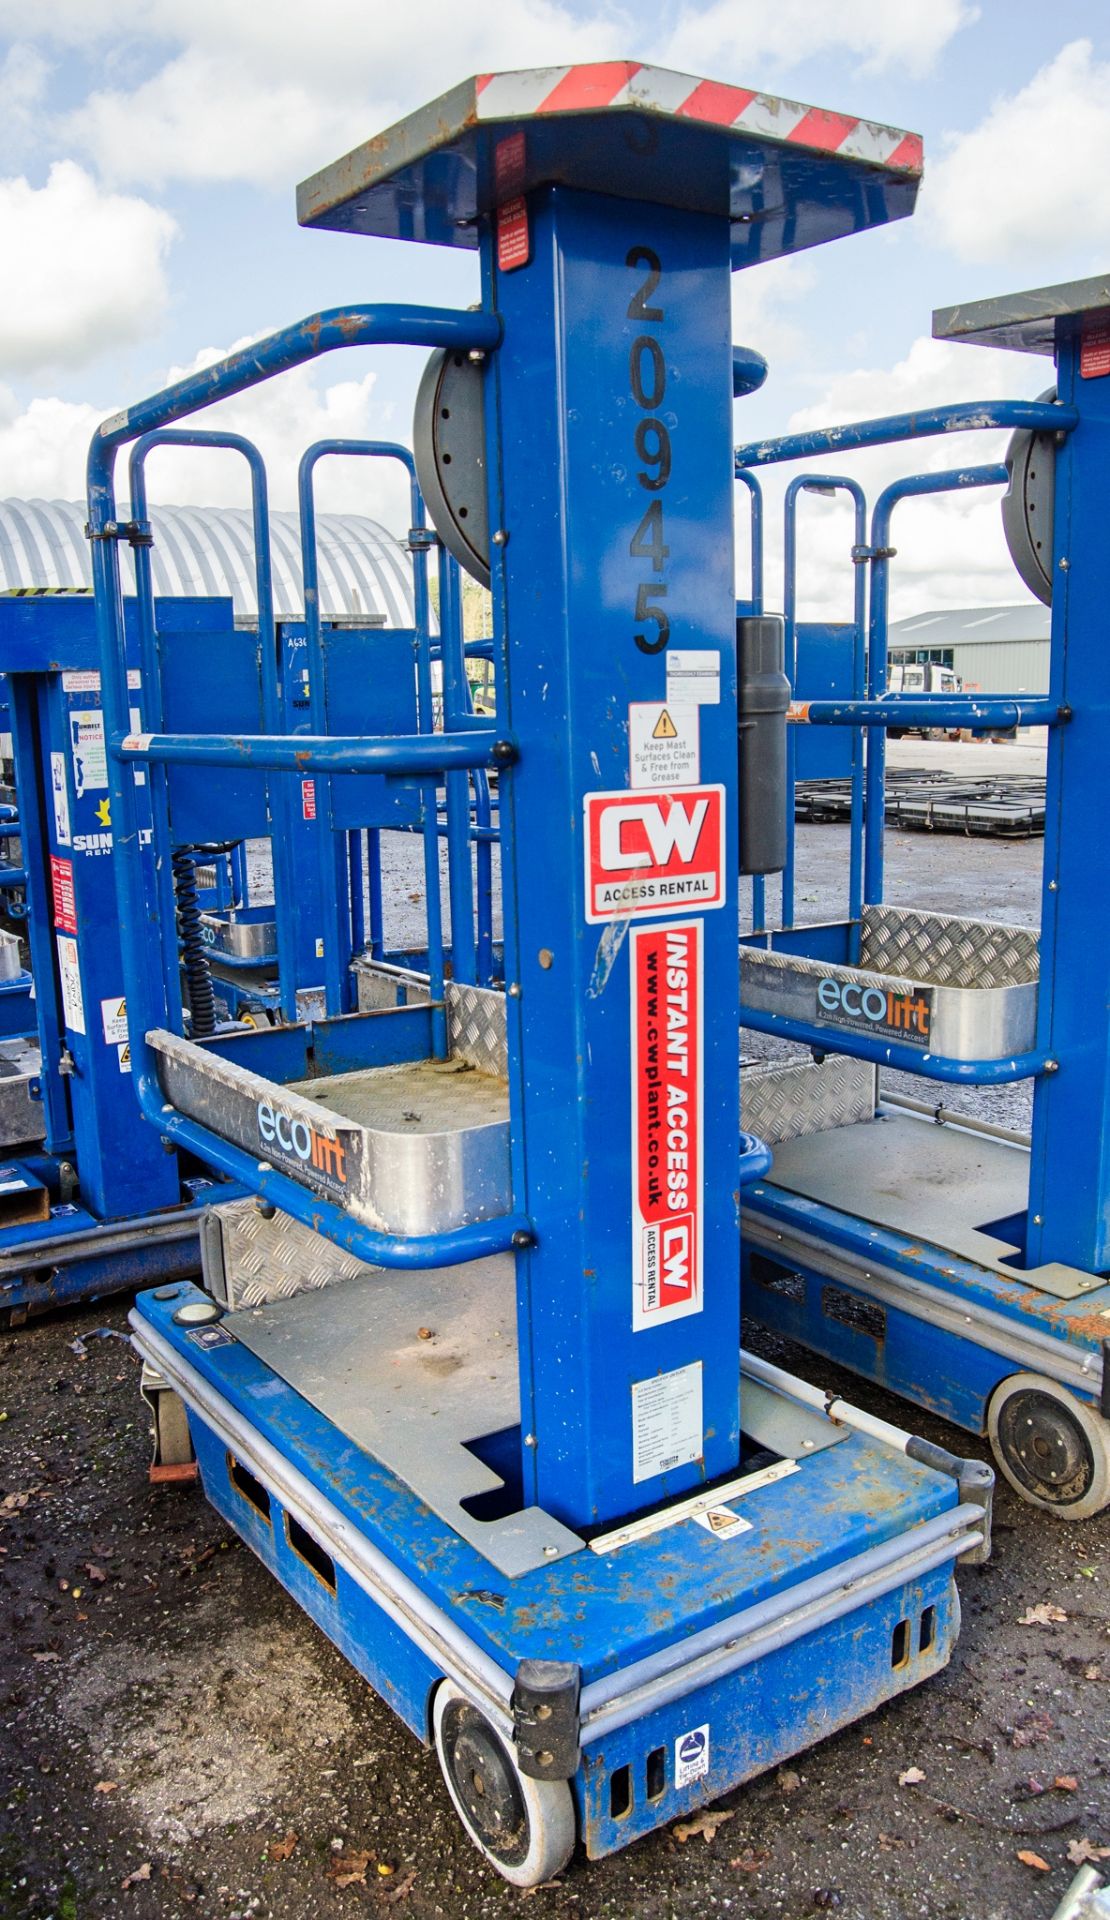 Power Tower Eco Lift push around manual vertical mast access platform CW20945 - Image 2 of 3